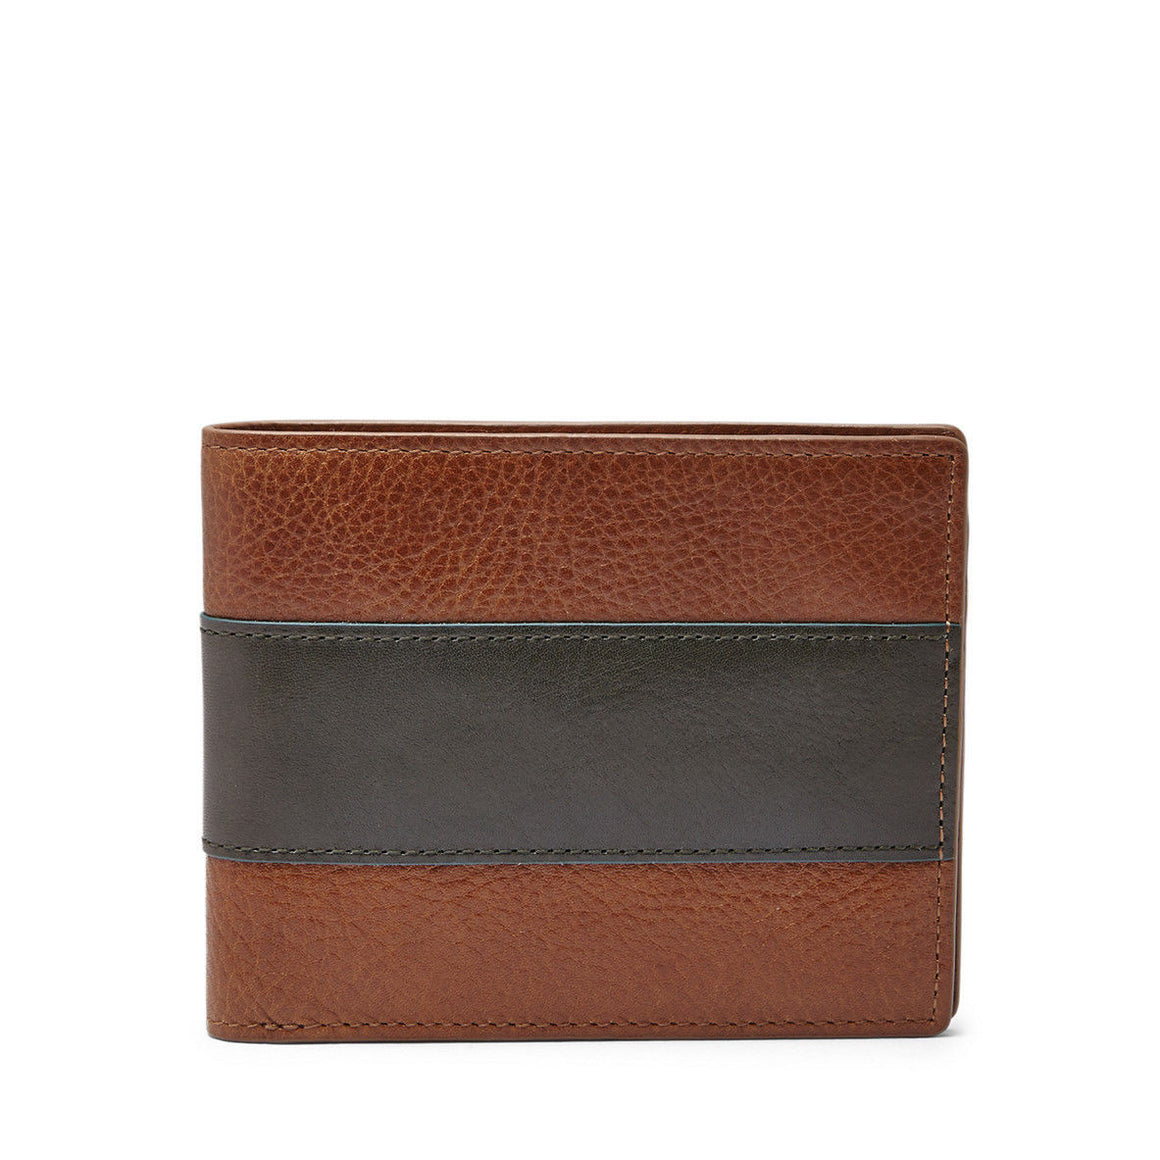 Fossil Men's Leather Charles Bifold Credit Card Wallet